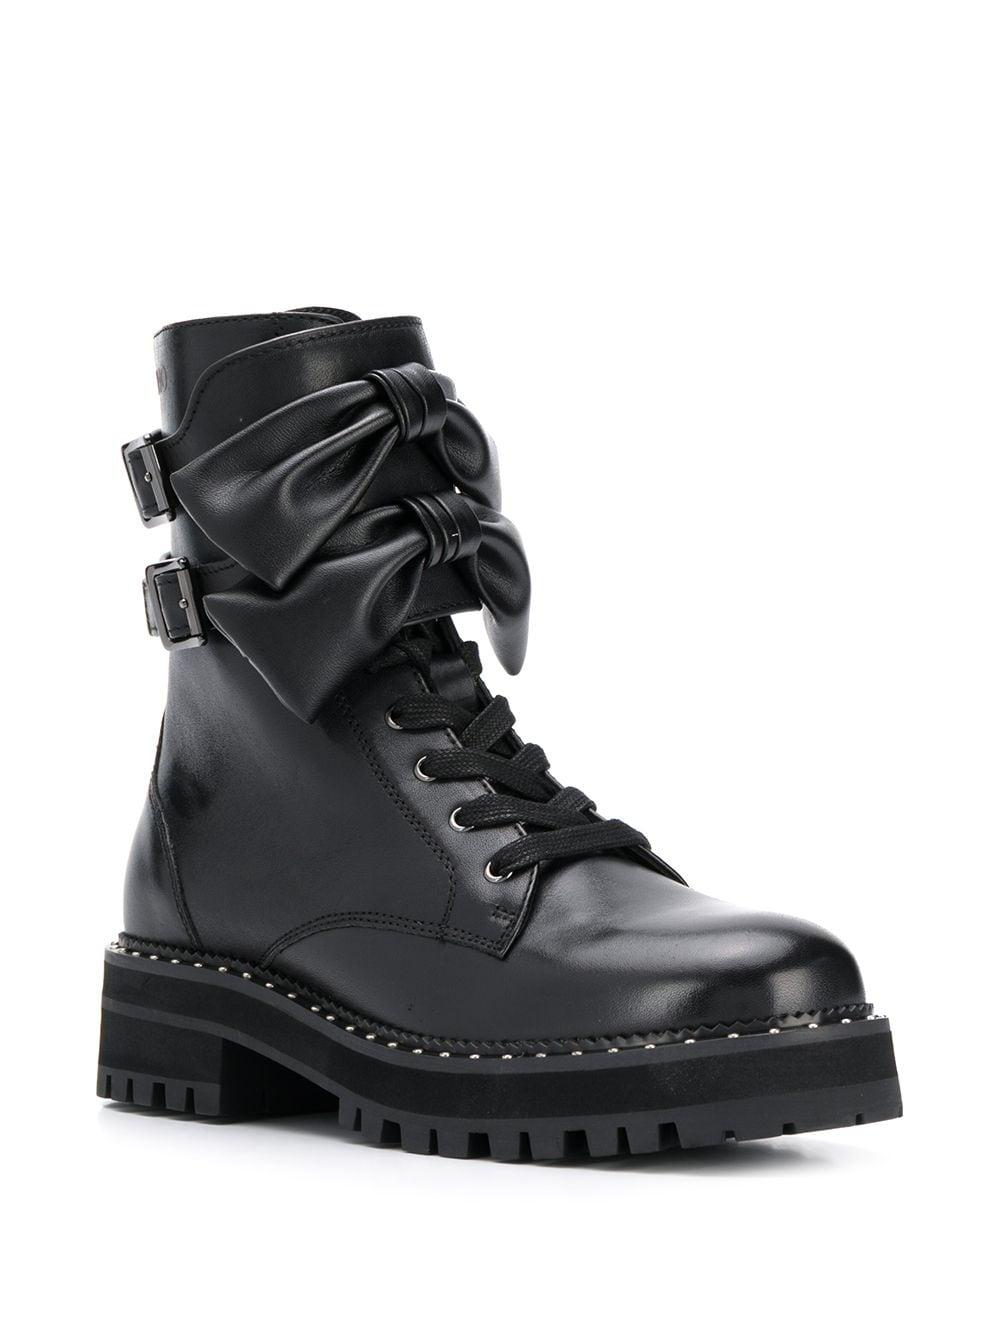 Liu Jo Leather Bow-embellished Combat Boots in Black - Lyst